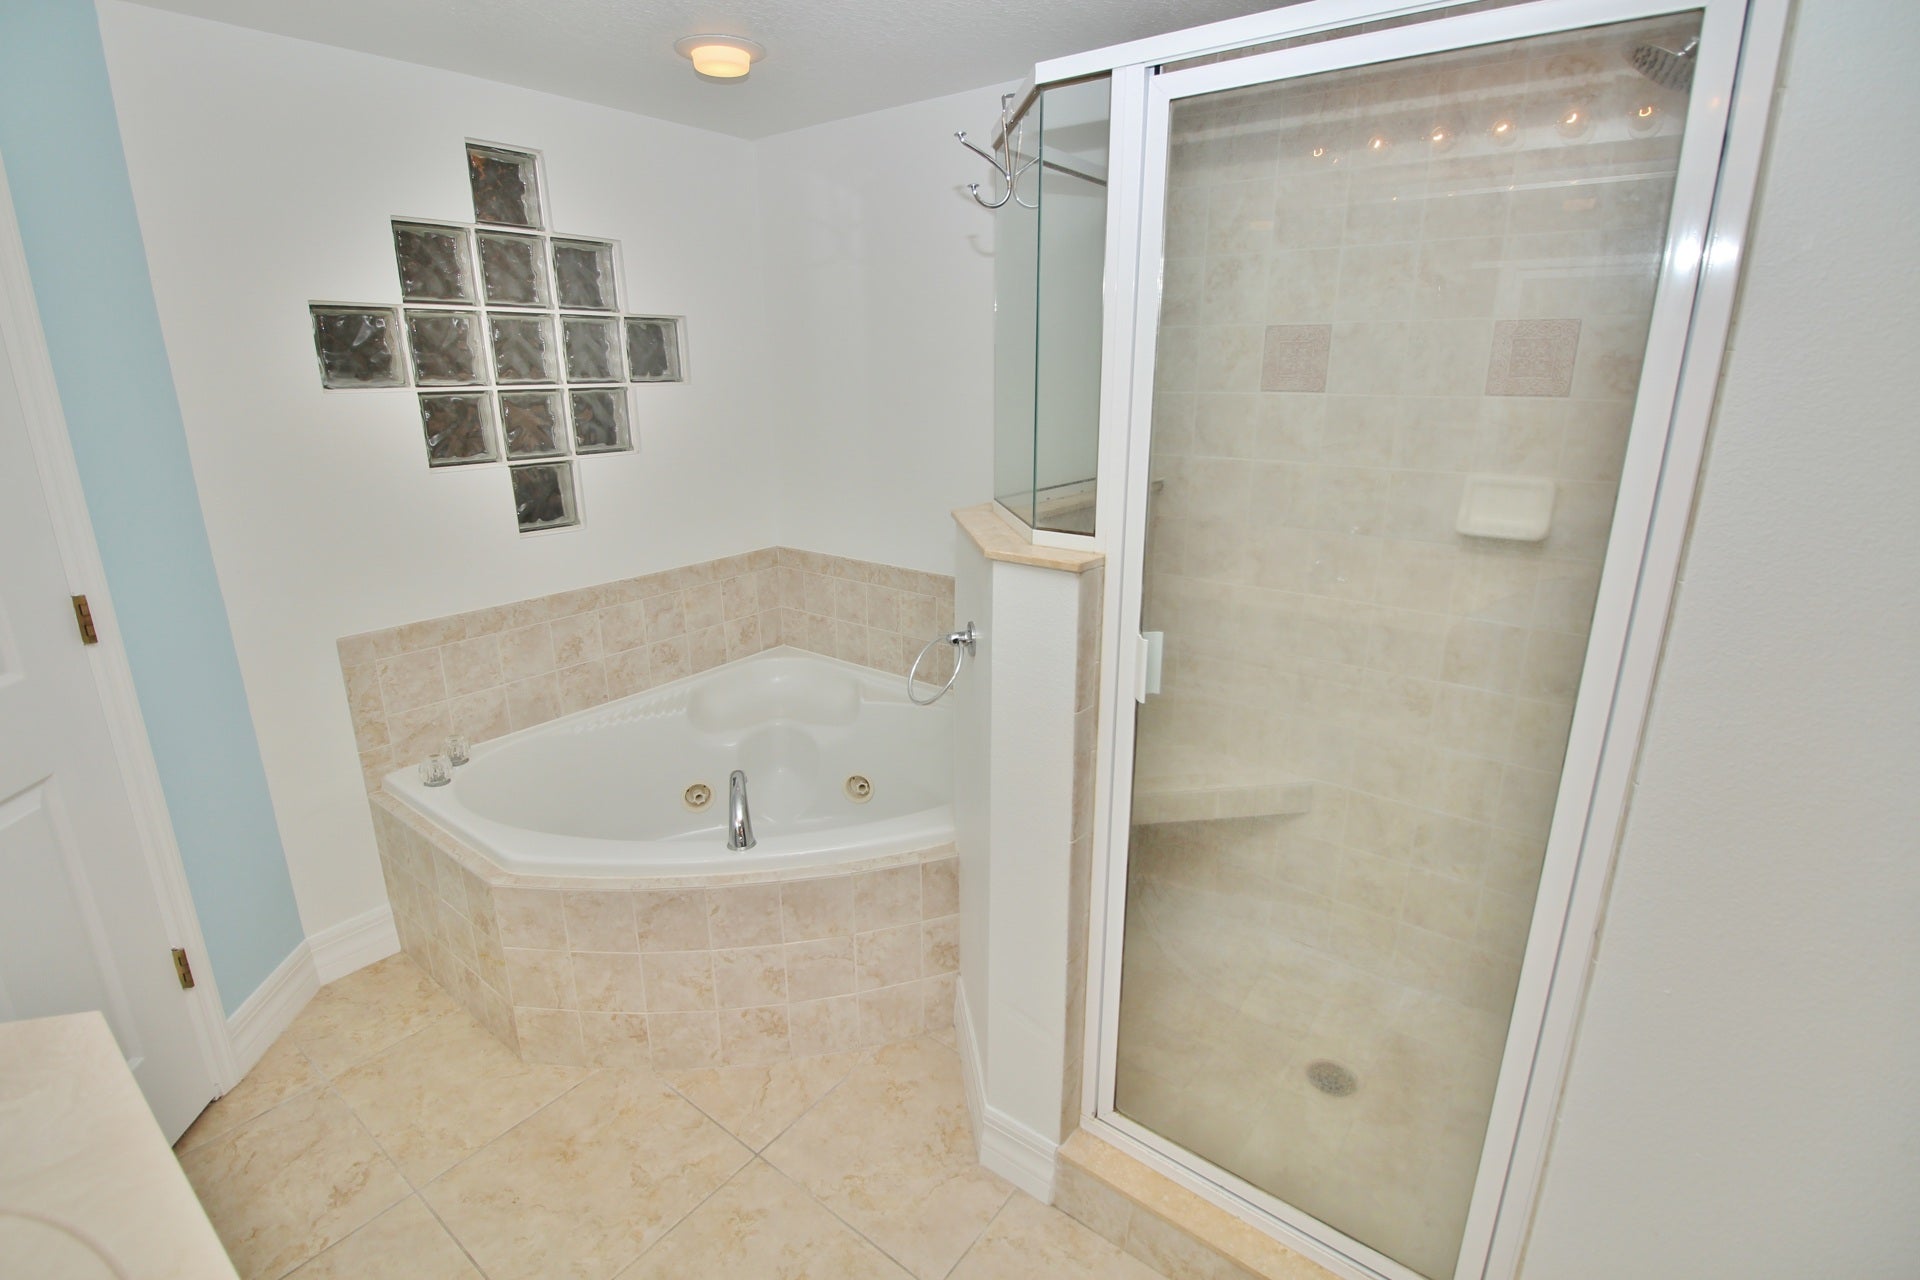 Tub and shower in primary bathroom